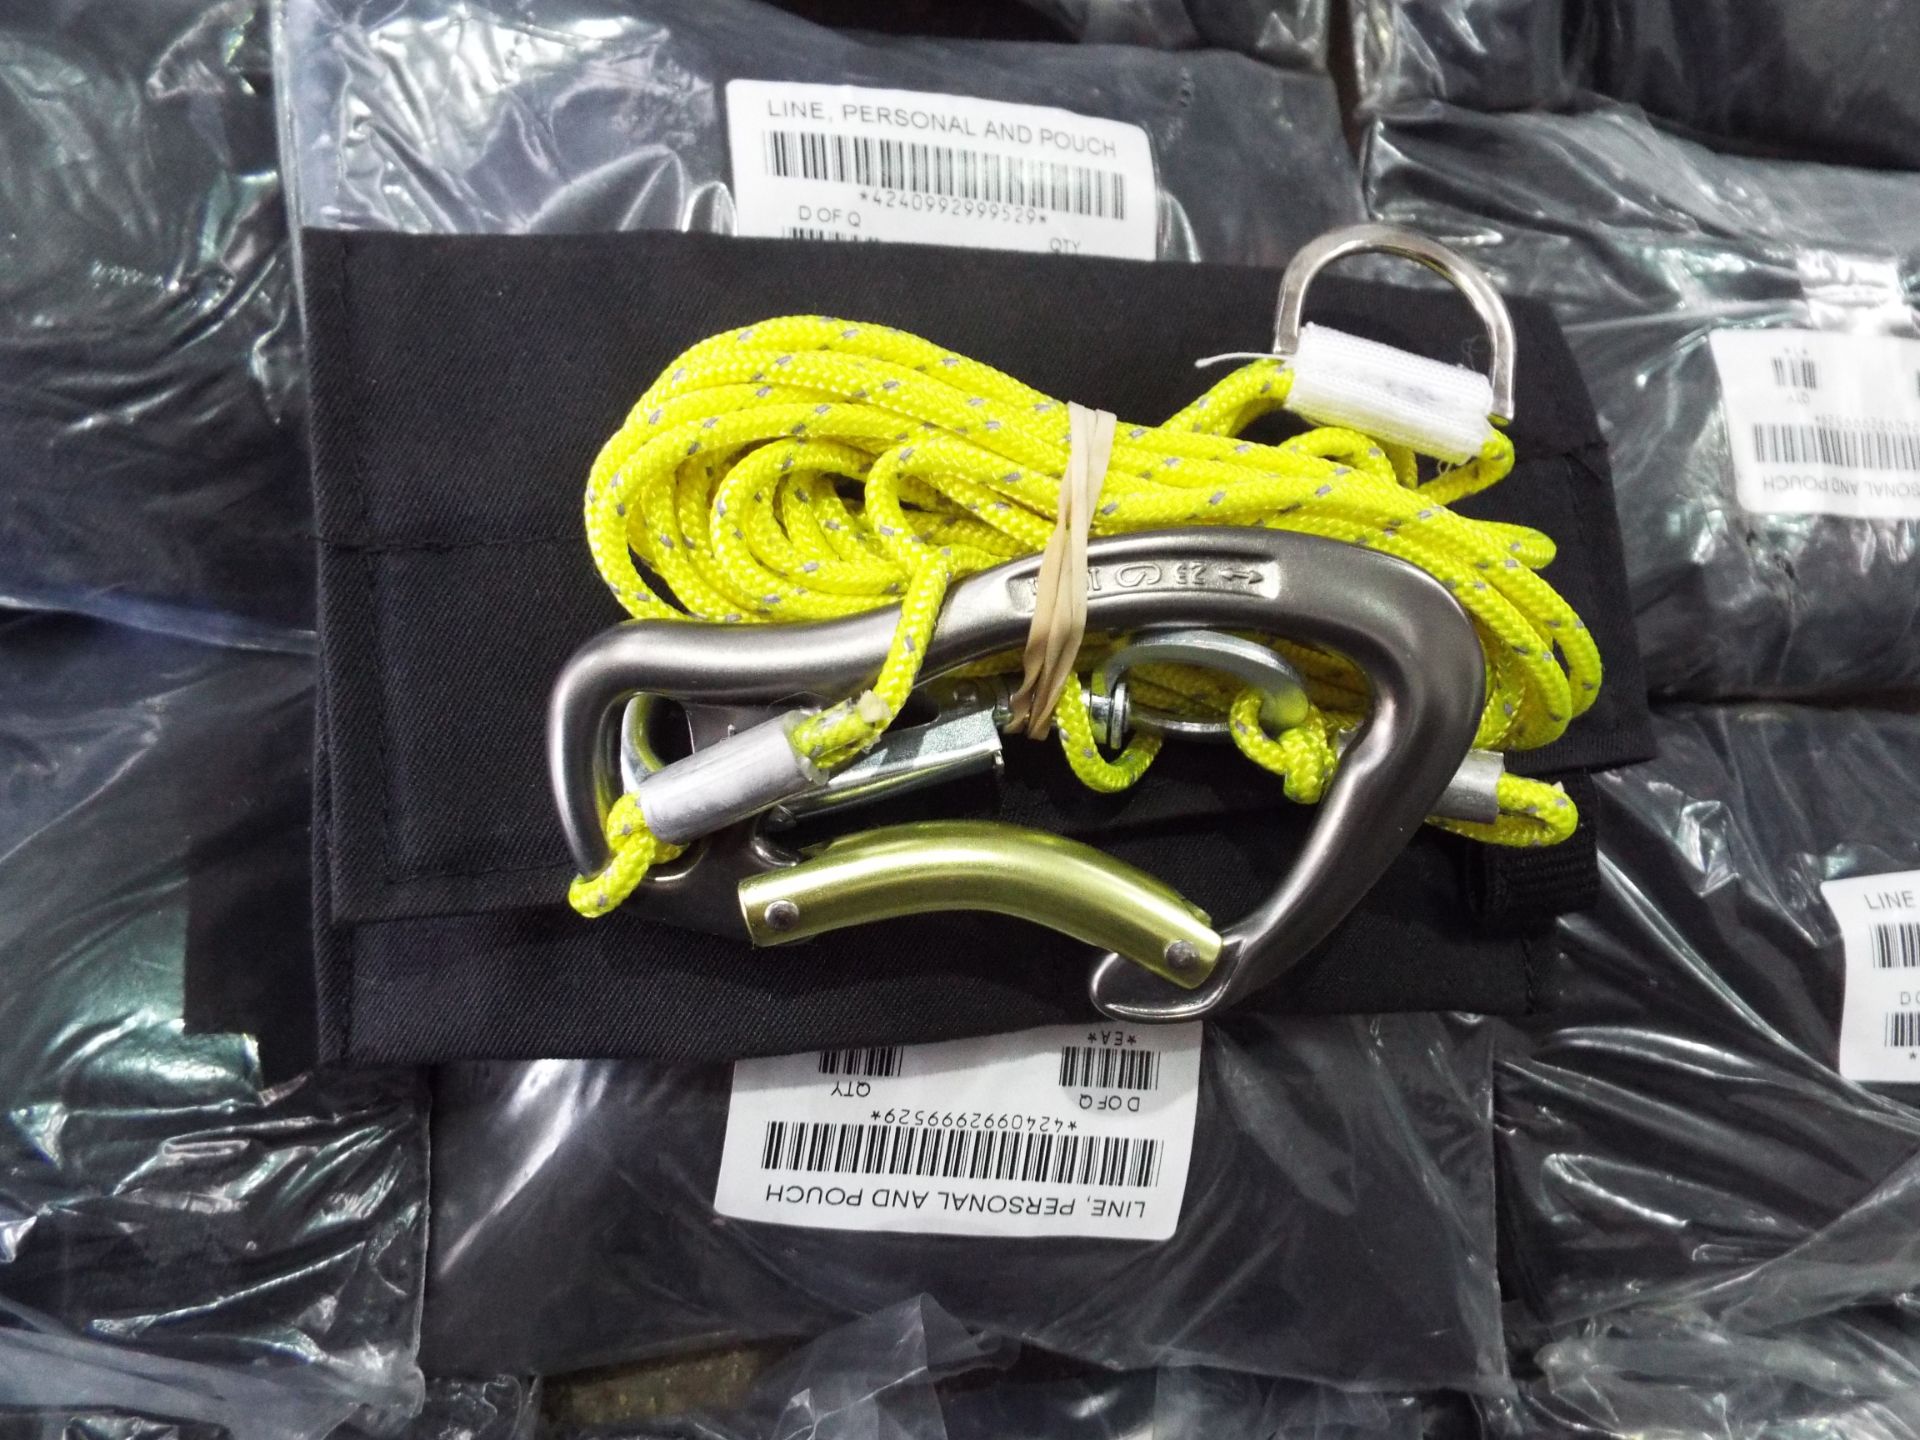 13 x Personal Safety Lines with Pouches - Image 2 of 6